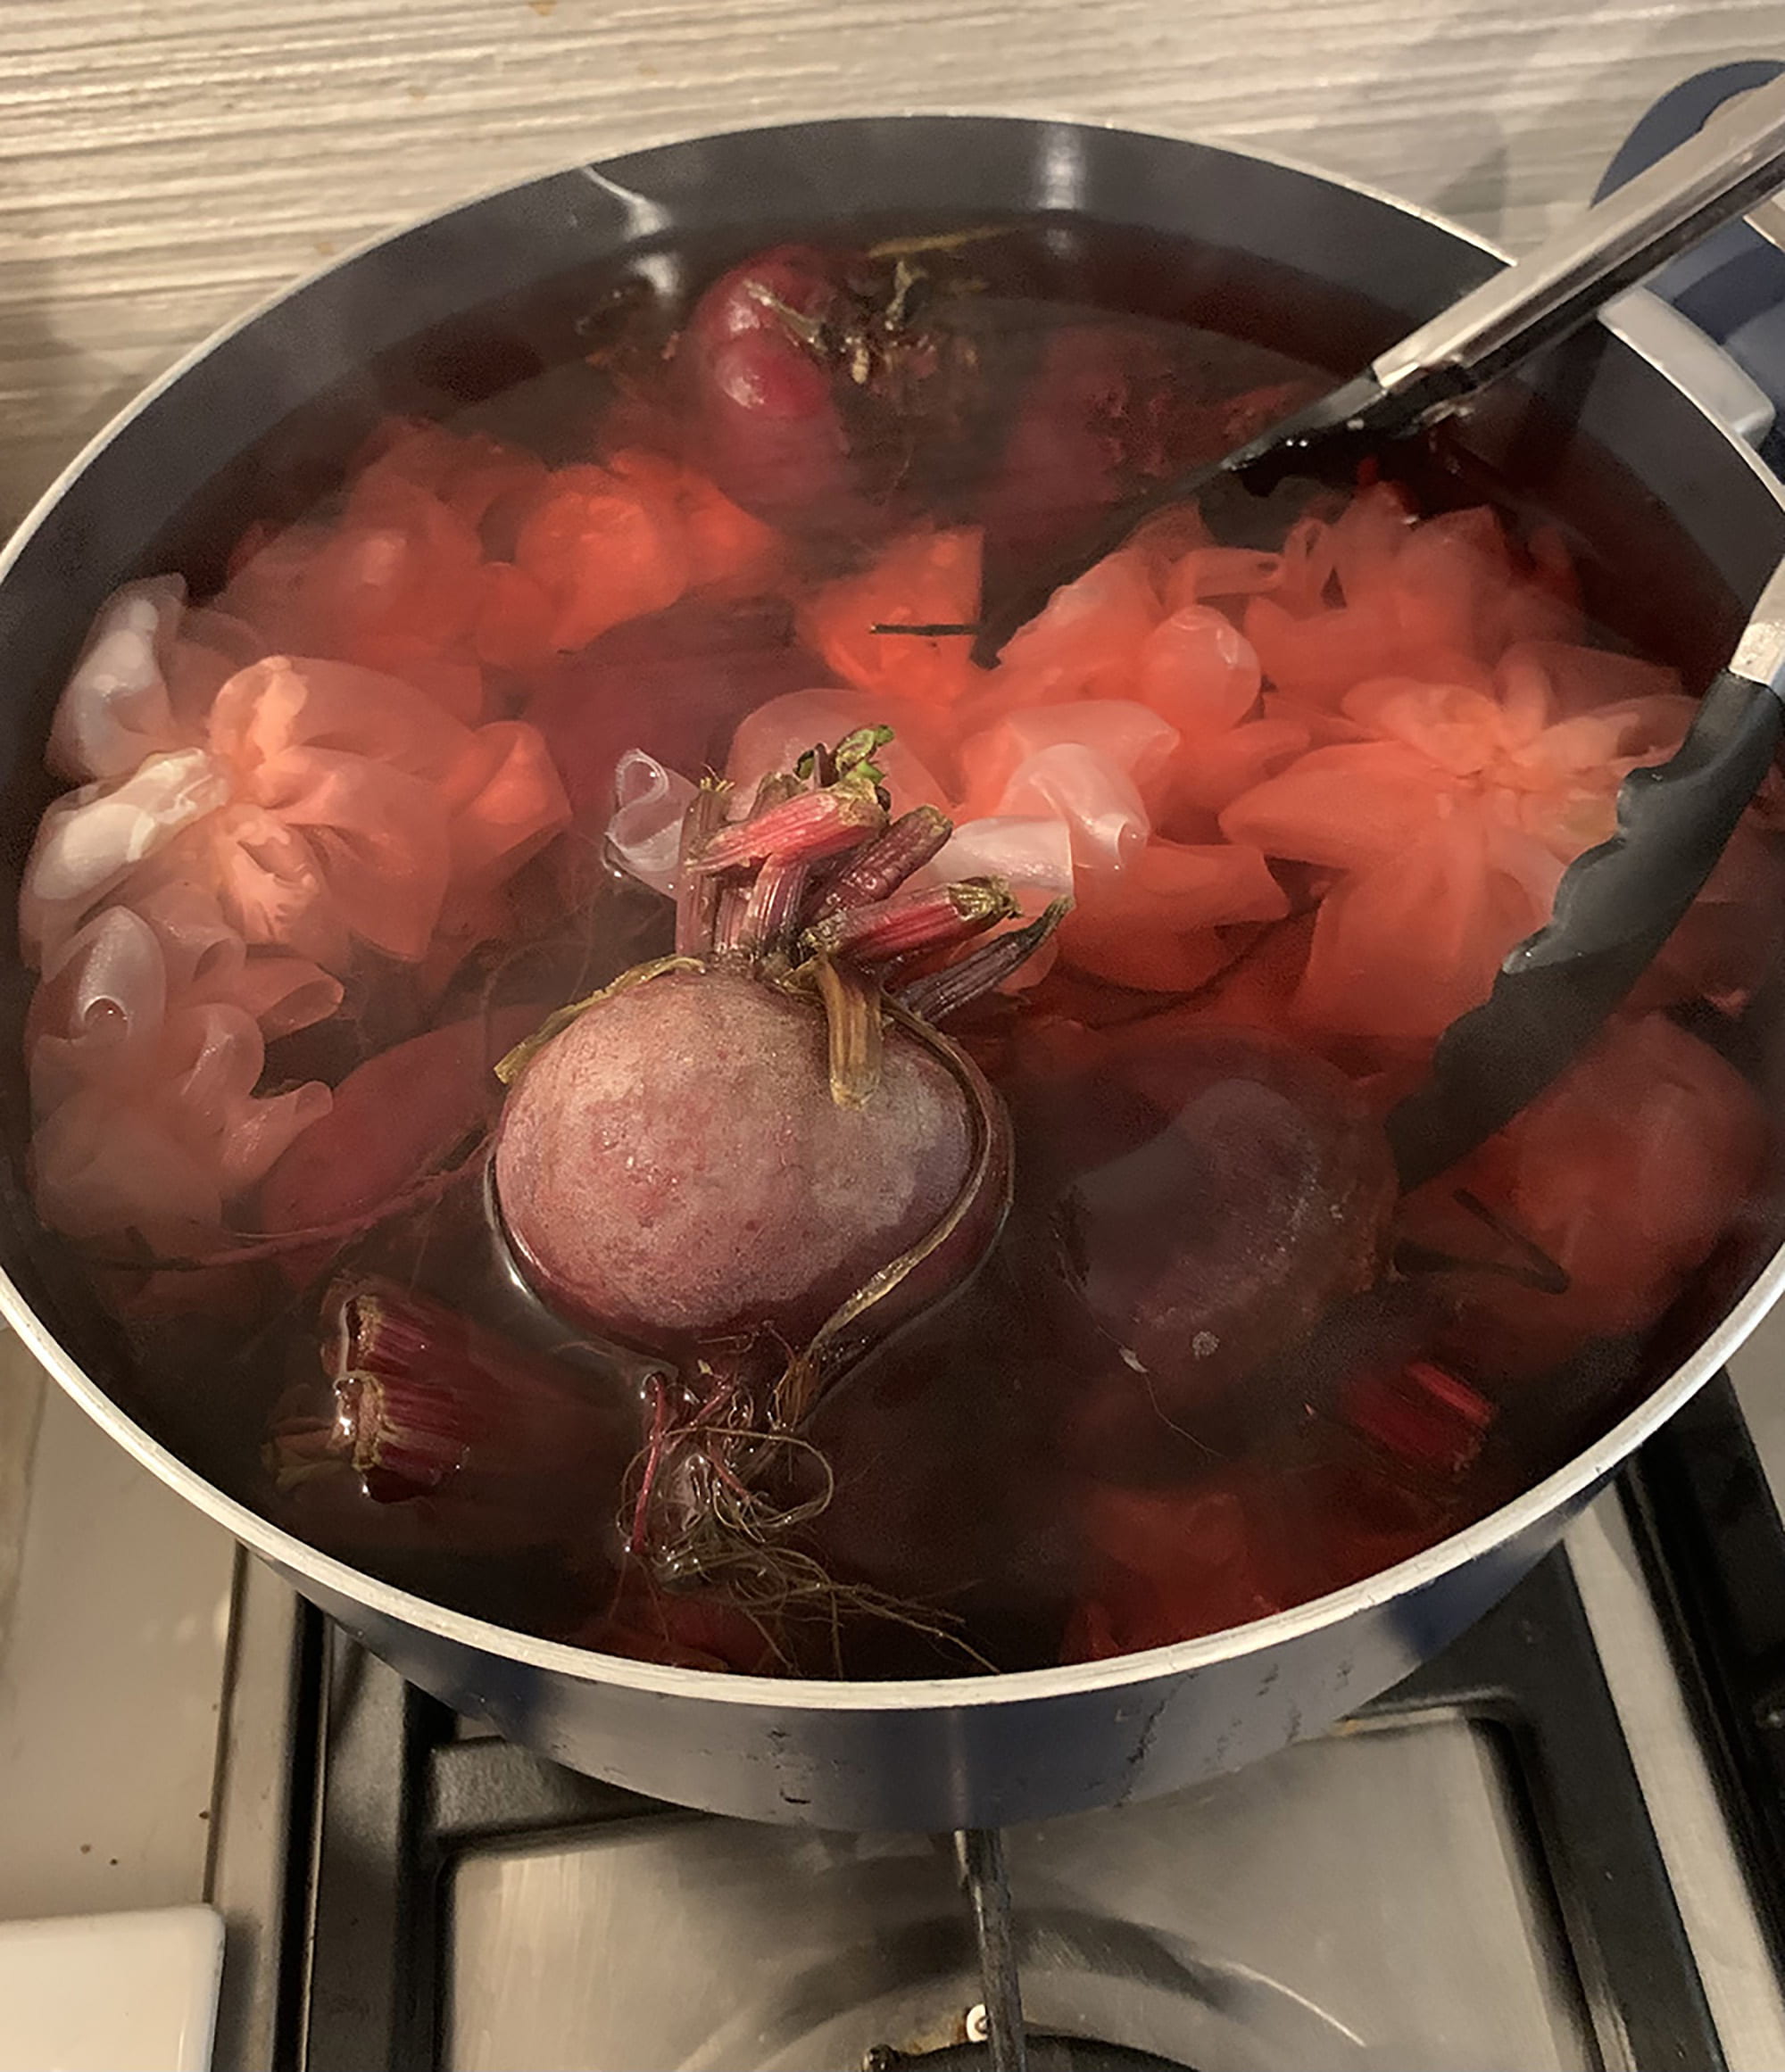 Beetroot and voile constructs in a cooking pot on a stovetop with silicone-tipped metal tongs.